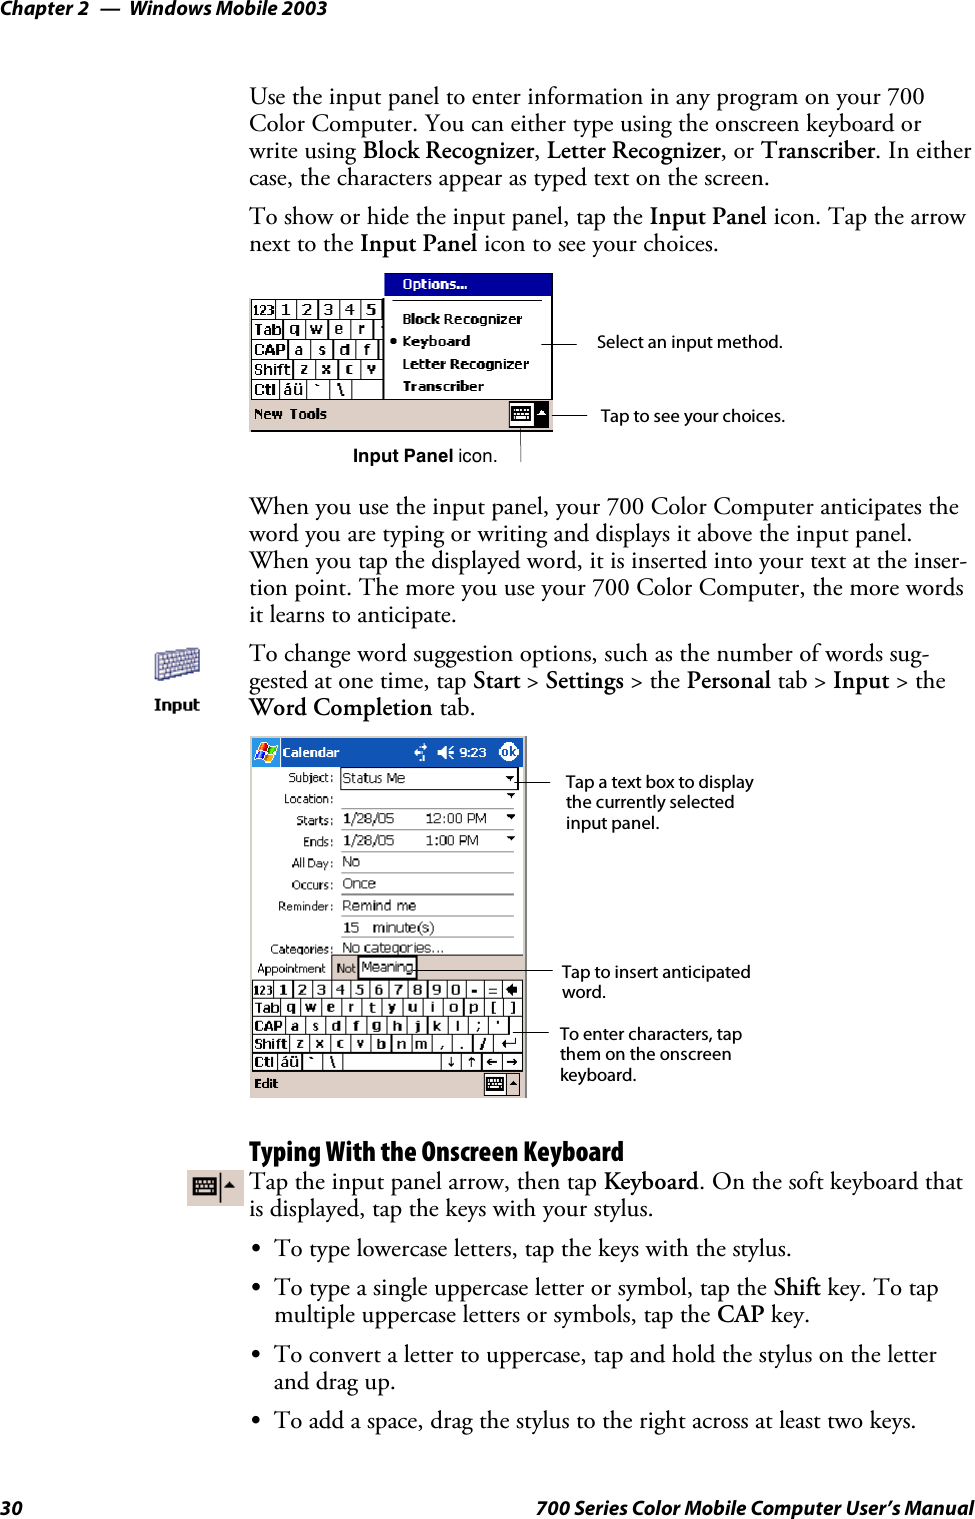 Windows Mobile 2003Chapter —230 700 Series Color Mobile Computer User’s ManualUse the input panel to enter information in any program on your 700Color Computer. You can either type using the onscreen keyboard orwrite using Block Recognizer,Letter Recognizer,orTranscriber.Ineithercase, the characters appear as typed text on the screen.To show or hide the input panel, tap the Input Panel icon. Tap the arrownext to the Input Panel icon to see your choices.Tap to see your choices.Input Panel icon.Select an input method.When you use the input panel, your 700 Color Computer anticipates theword you are typing or writing and displays it above the input panel.When you tap the displayed word, it is inserted into your text at the inser-tion point. The more you use your 700 Color Computer, the more wordsit learns to anticipate.To change word suggestion options, such as the number of words sug-gested at one time, tap Start &gt;Settings &gt;thePersonal tab &gt; Input &gt;theWord Completion tab.Tap a text box to displaythe currently selectedinput panel.To enter characters, tapthem on the onscreenkeyboard.Tap to insert anticipatedword.Typing With the Onscreen KeyboardTap the input panel arrow, then tap Keyboard.Onthesoftkeyboardthatis displayed, tap the keys with your stylus.STo type lowercase letters, tap the keys with the stylus.STo type a single uppercase letter or symbol, tap the Shift key. To tapmultiple uppercase letters or symbols, tap the CAP key.STo convert a letter to uppercase, tap and hold the stylus on the letterand drag up.STo add a space, drag the stylus to the right across at least two keys.